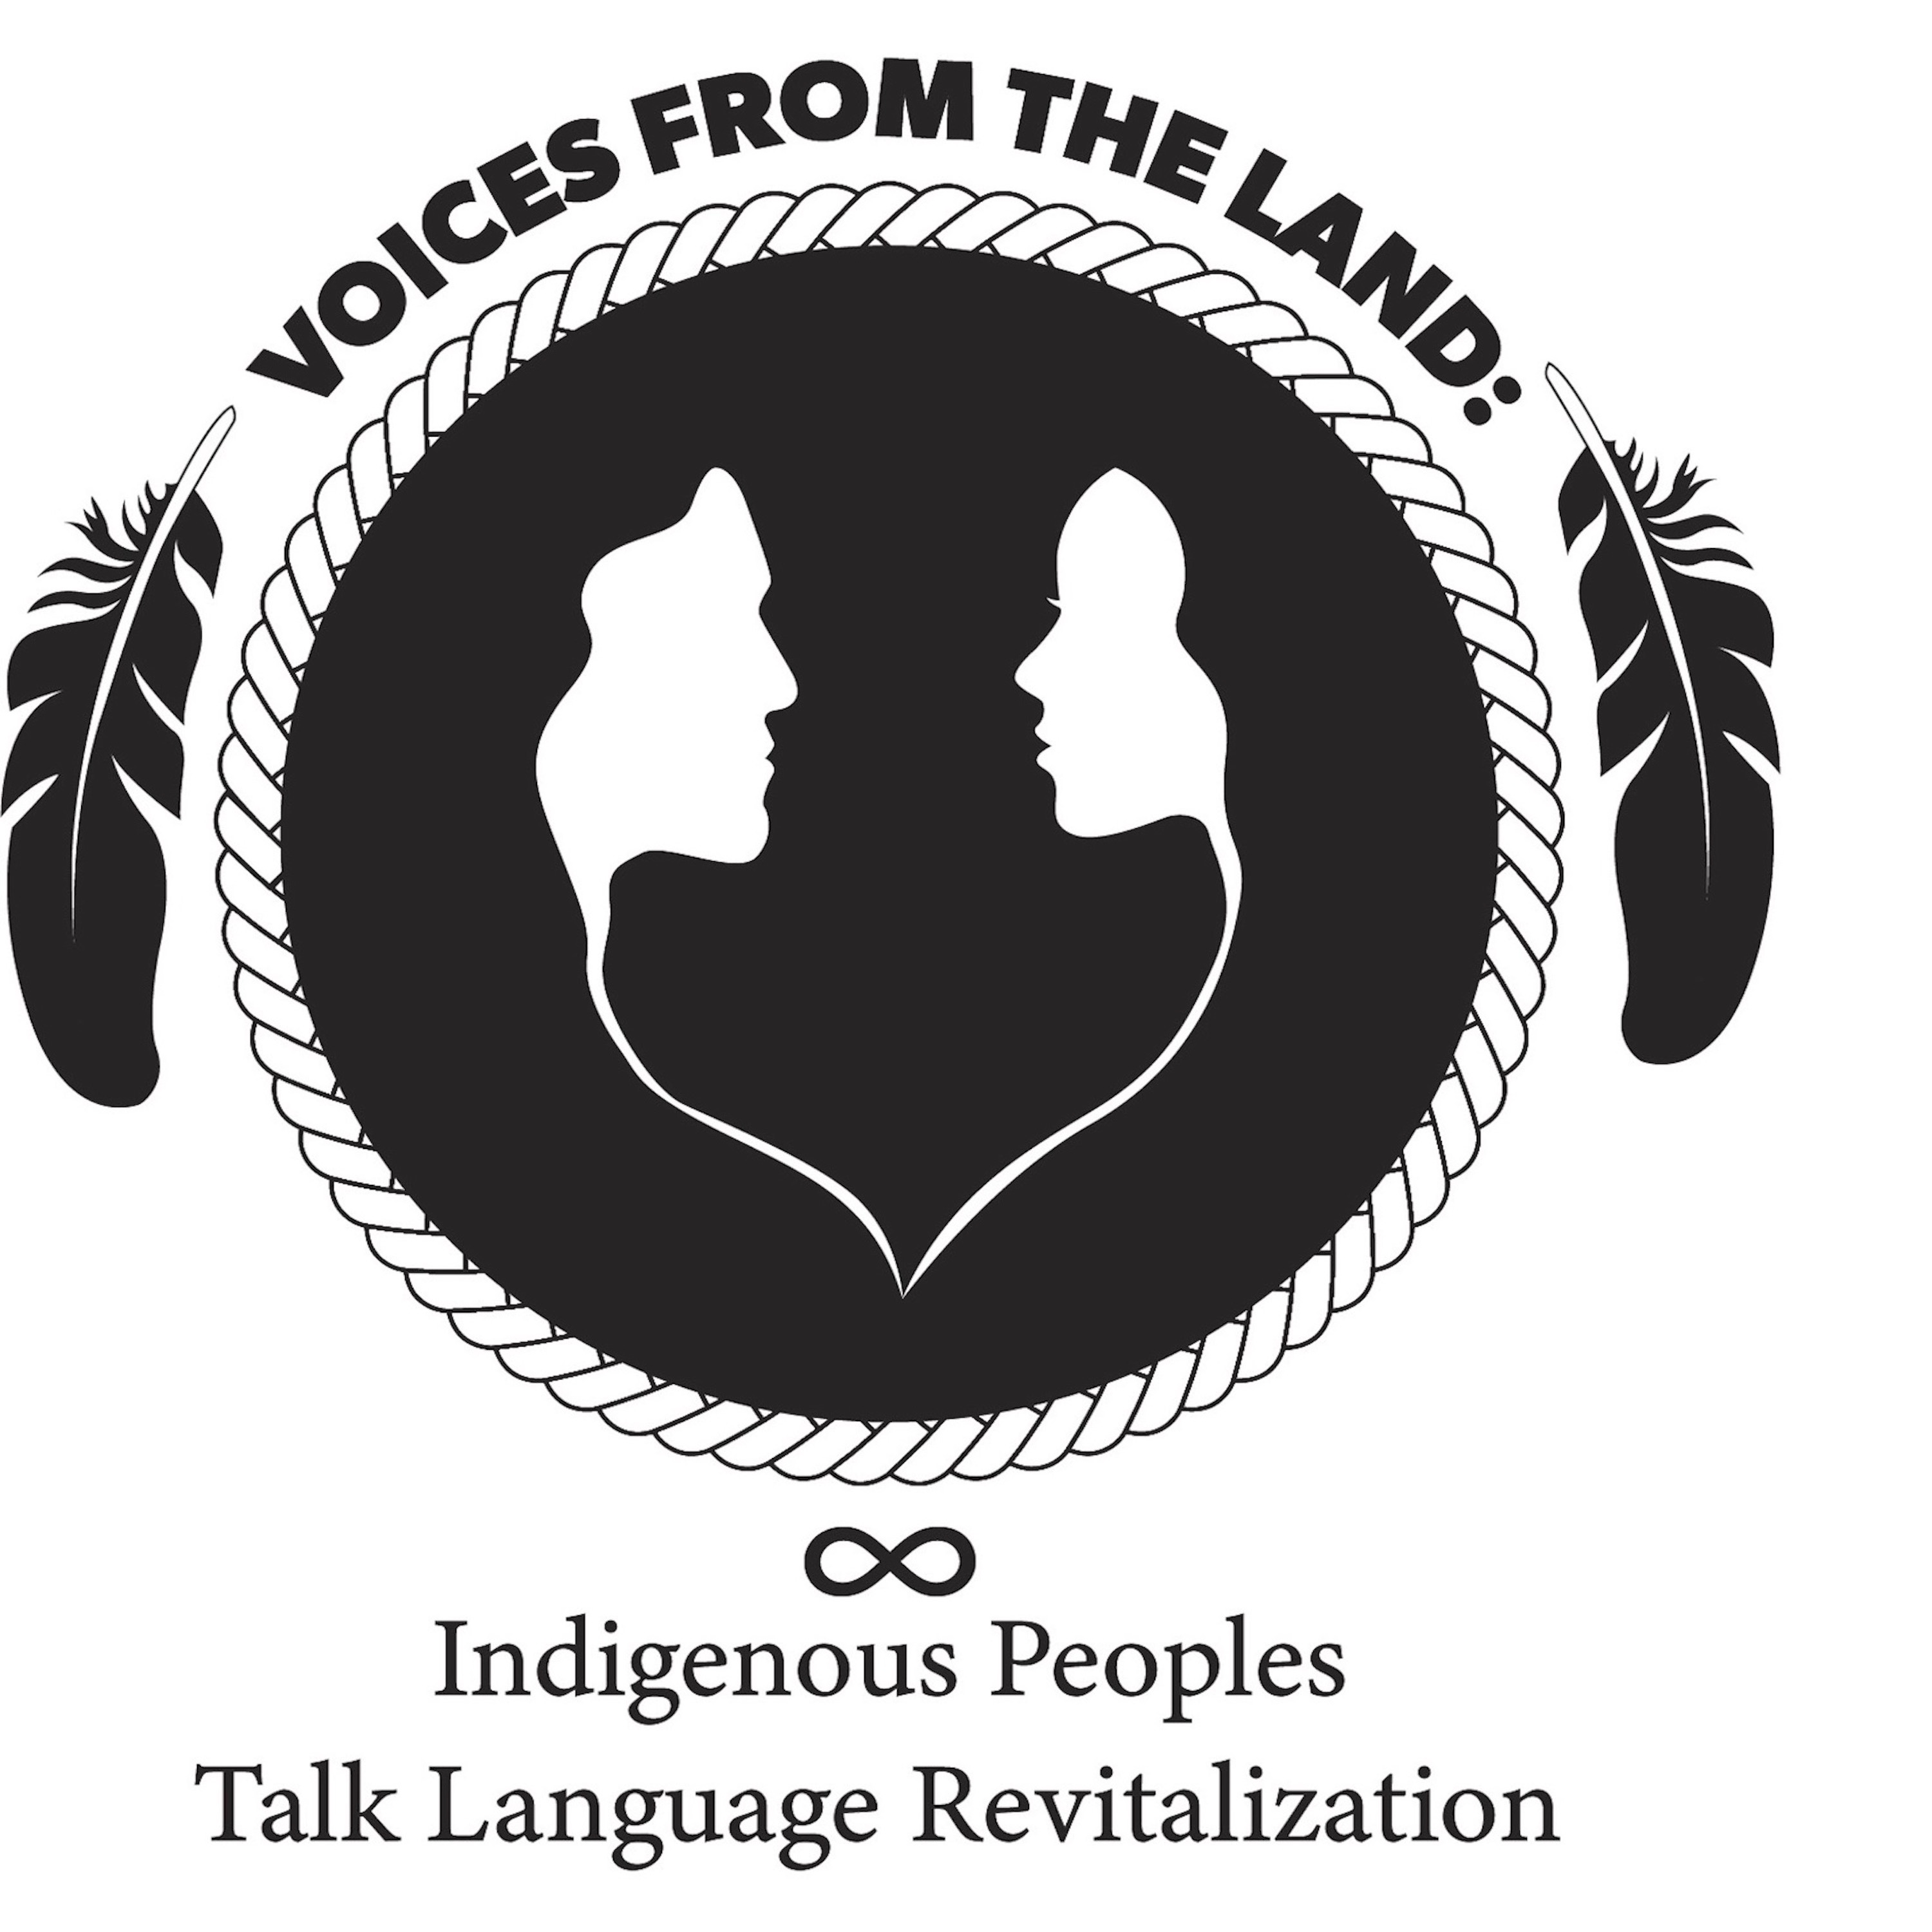 Voices from the Land: Indigenous Peoples Talk Language Revitalization